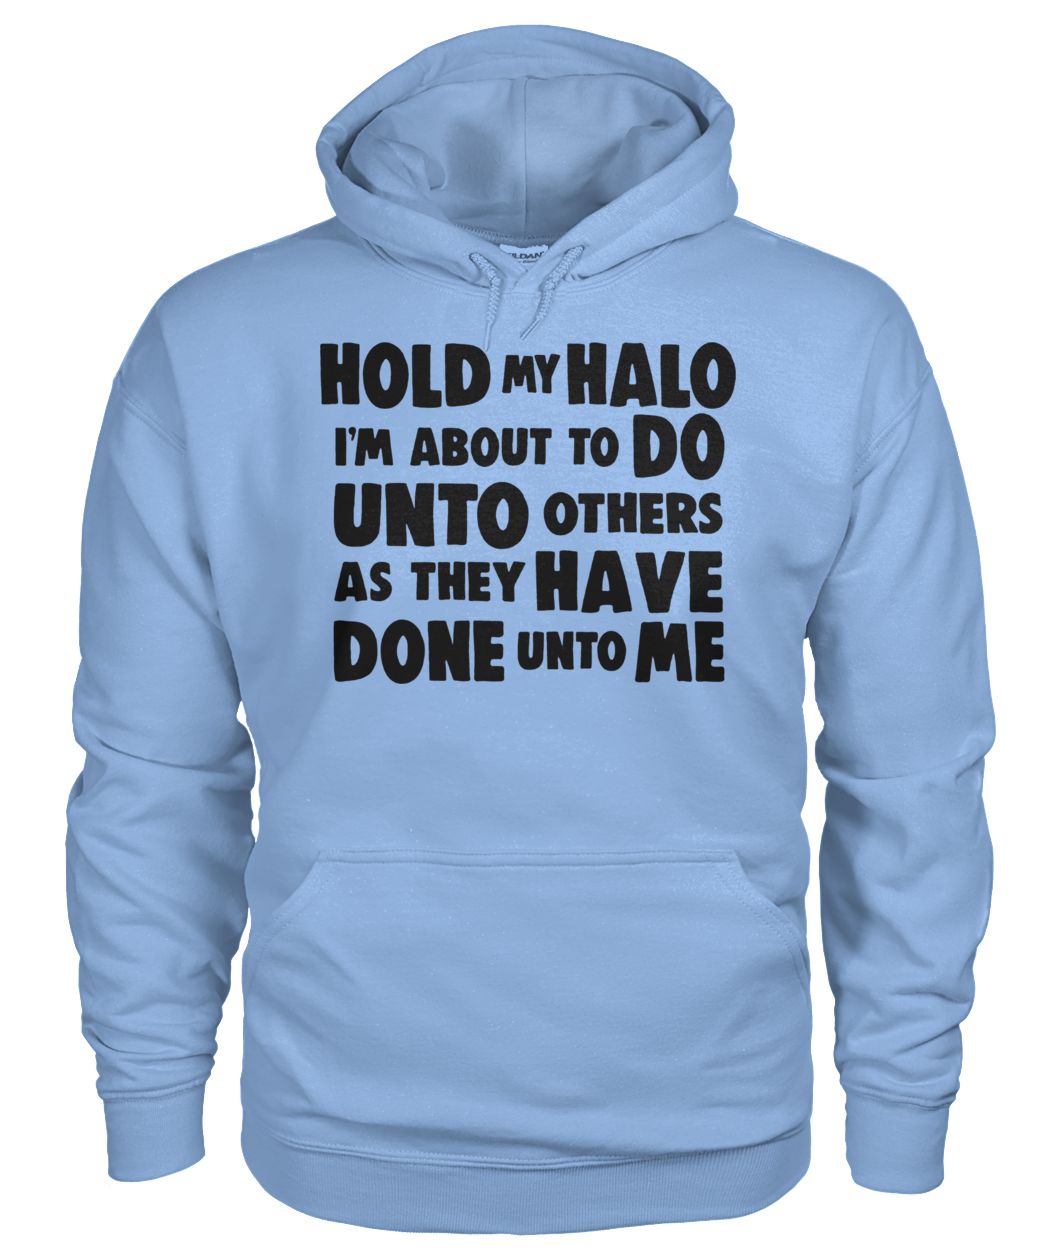 Hold my halo I'm about to do unto others as they have done unto me hoodie